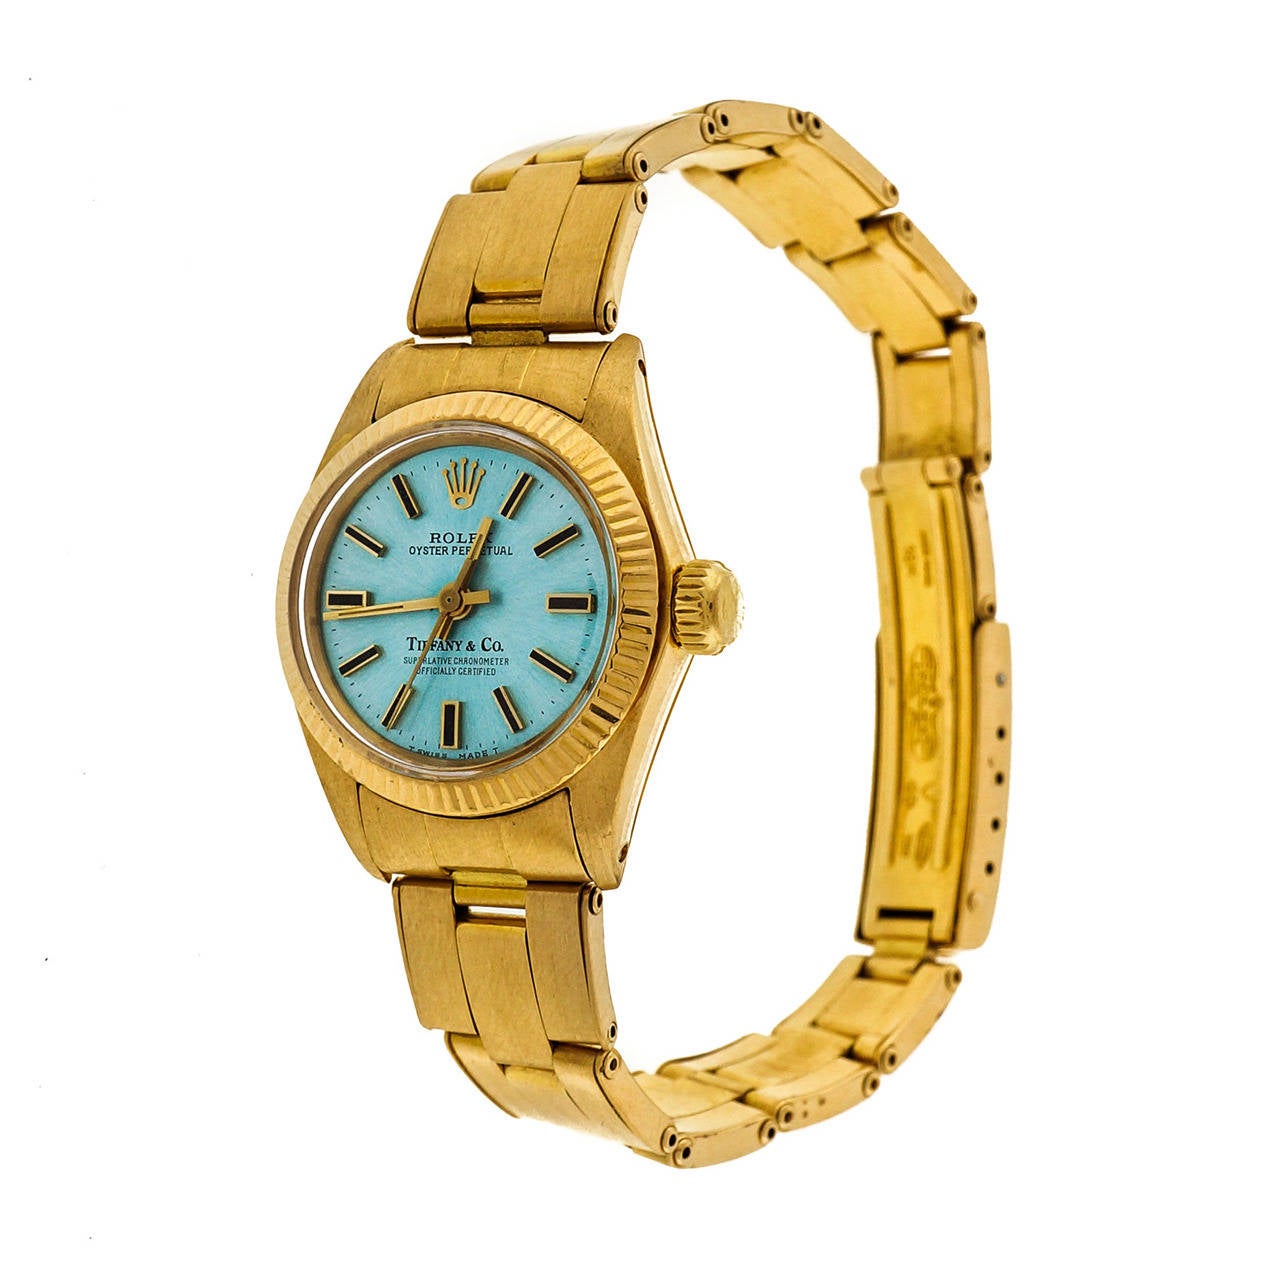 Vintage 1969-1970 Tiffany & Co 18k yellow gold Oyster Perpetual watch model 6719 retailed by Tiffany & Co with its original 18k gold rivet Oyster band by Rolex in excellent condition. Professionally refinished custom color bright ice blue dial.The